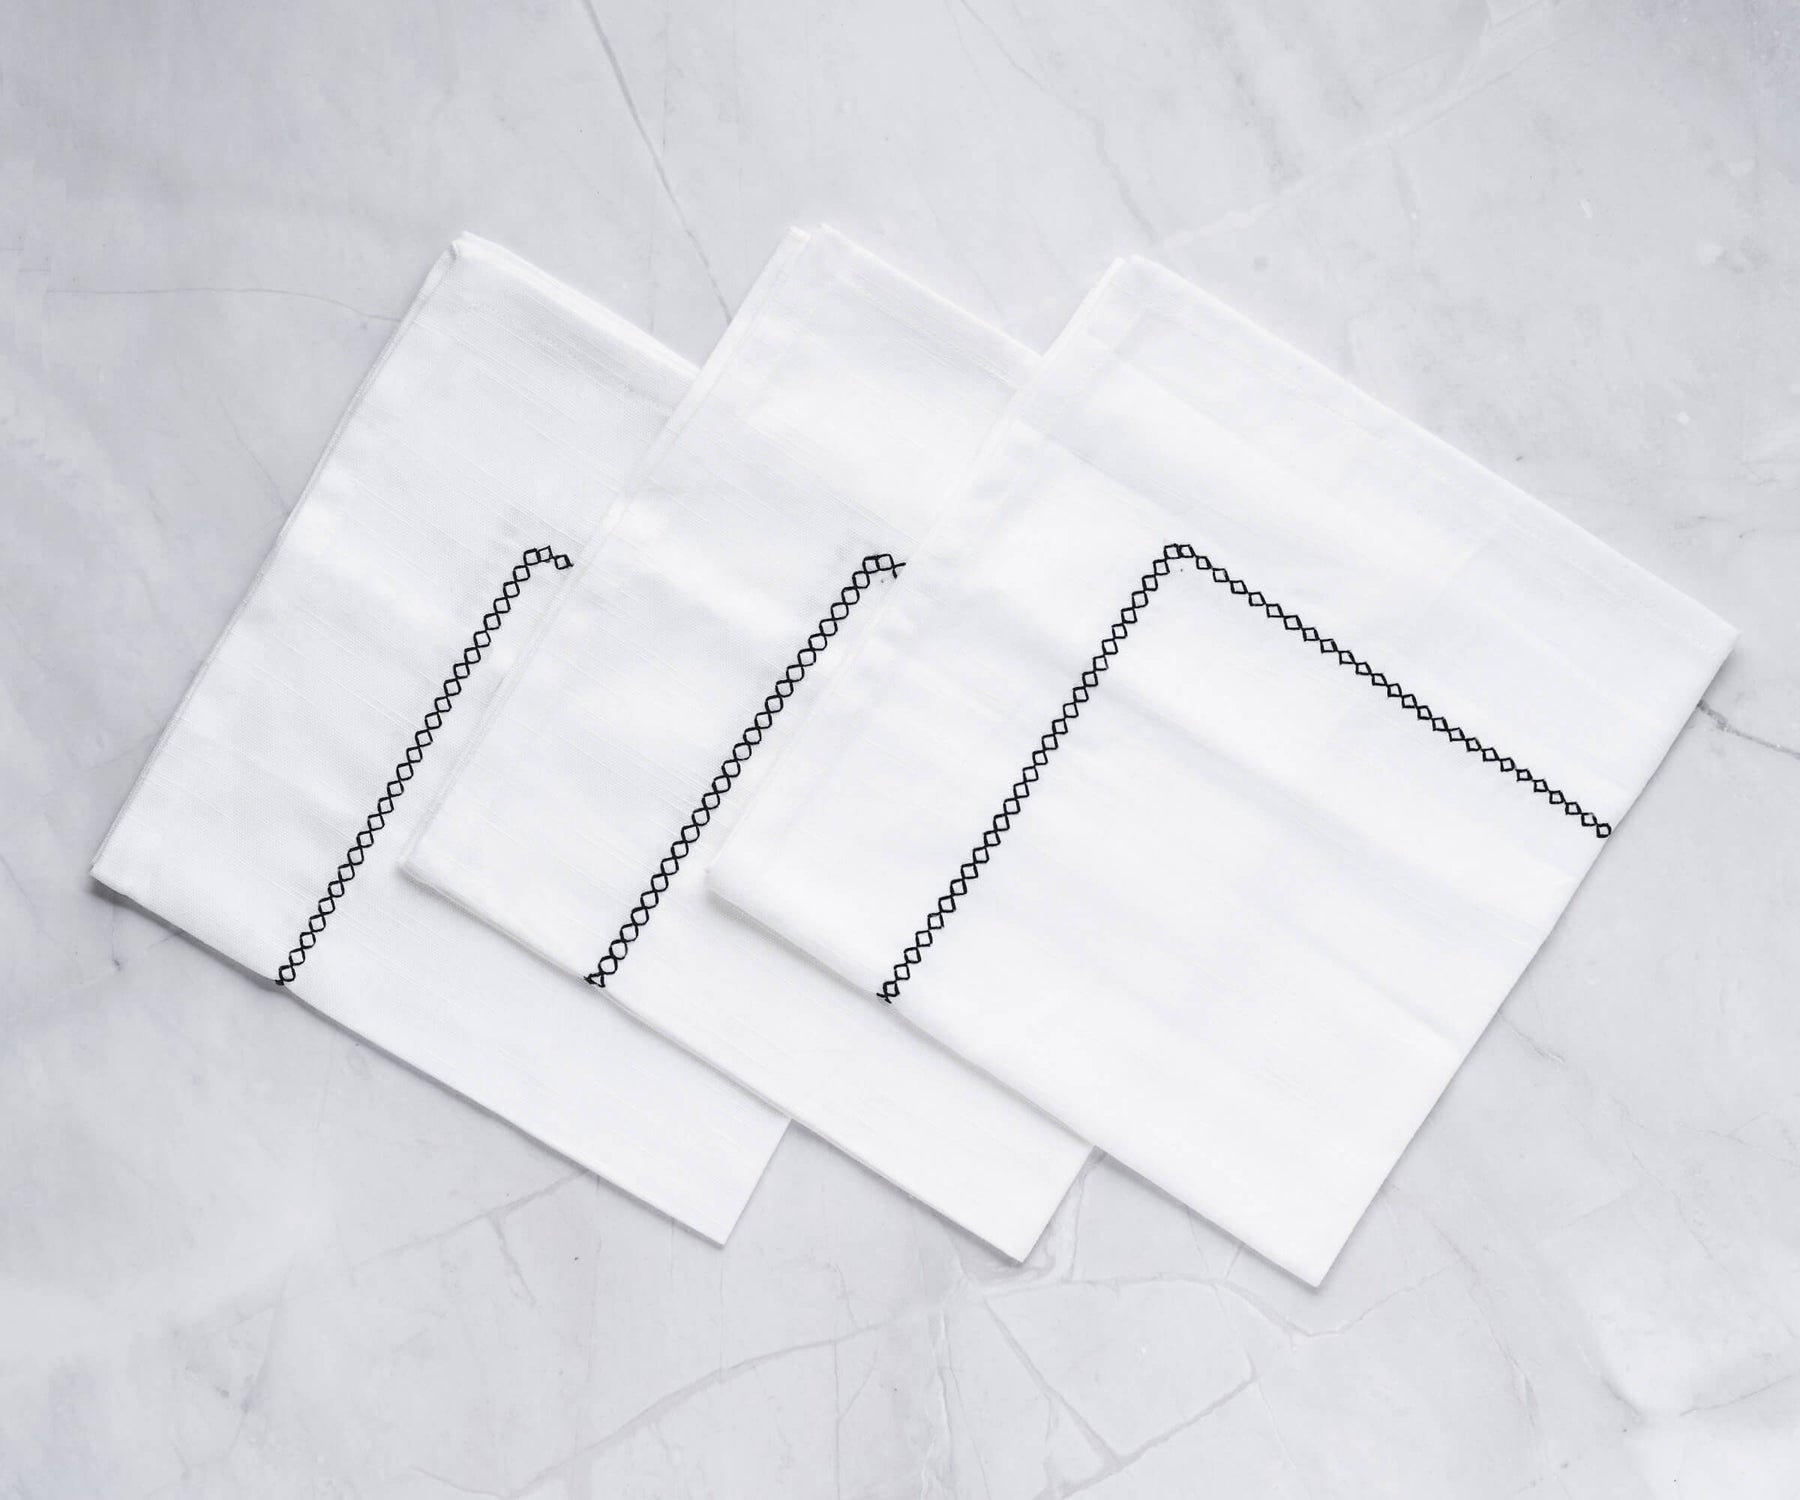 Cotton Cloth Napkins make them a reliable choice for mealtime cleanup.